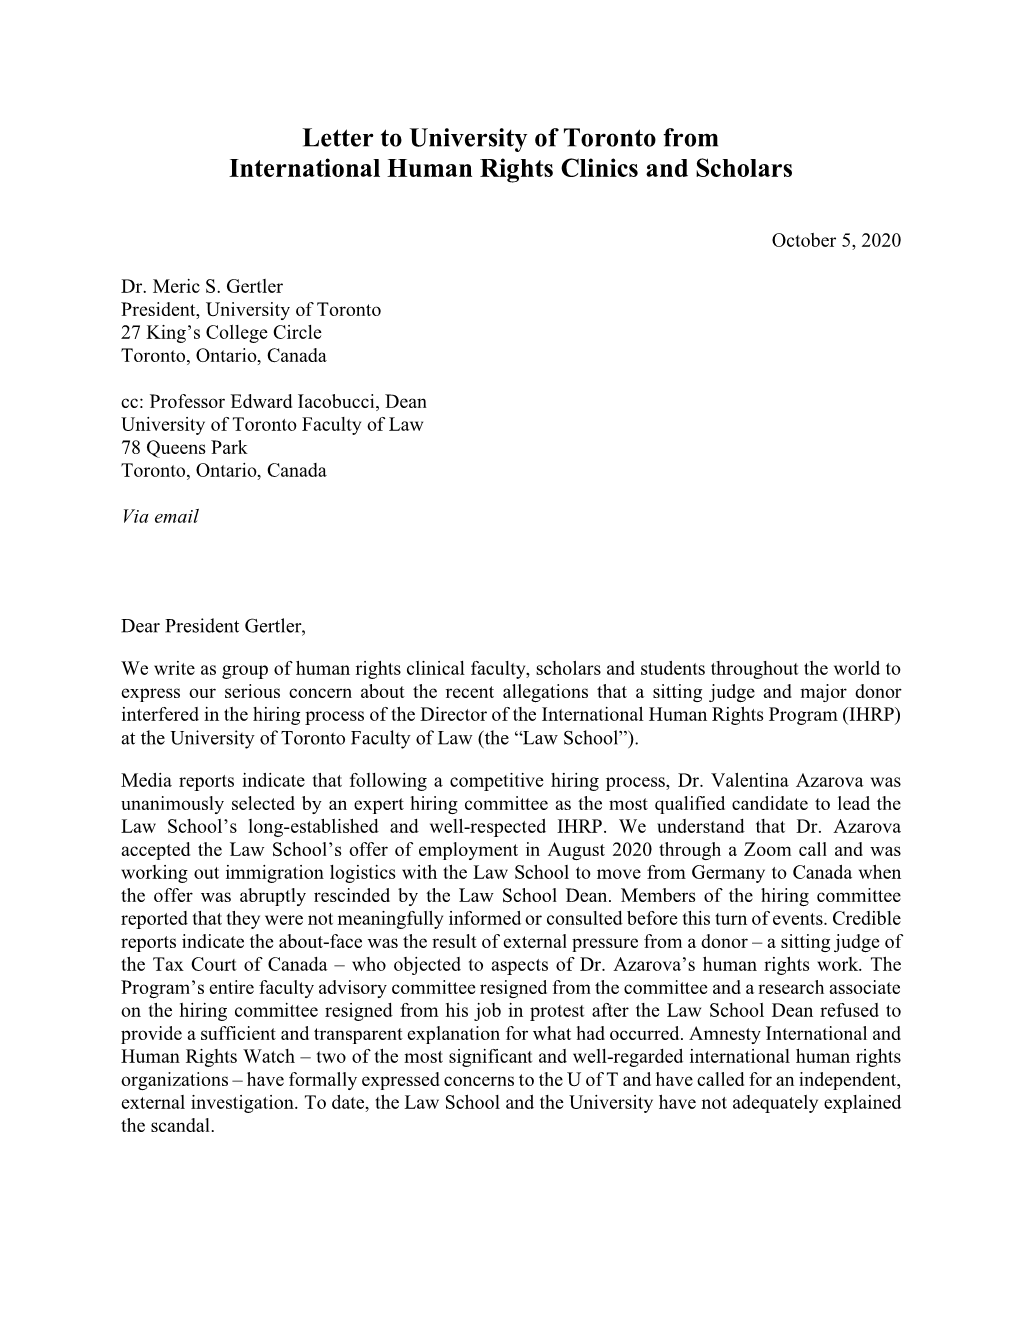 Letter to University of Toronto from International Human Rights Clinics and Scholars